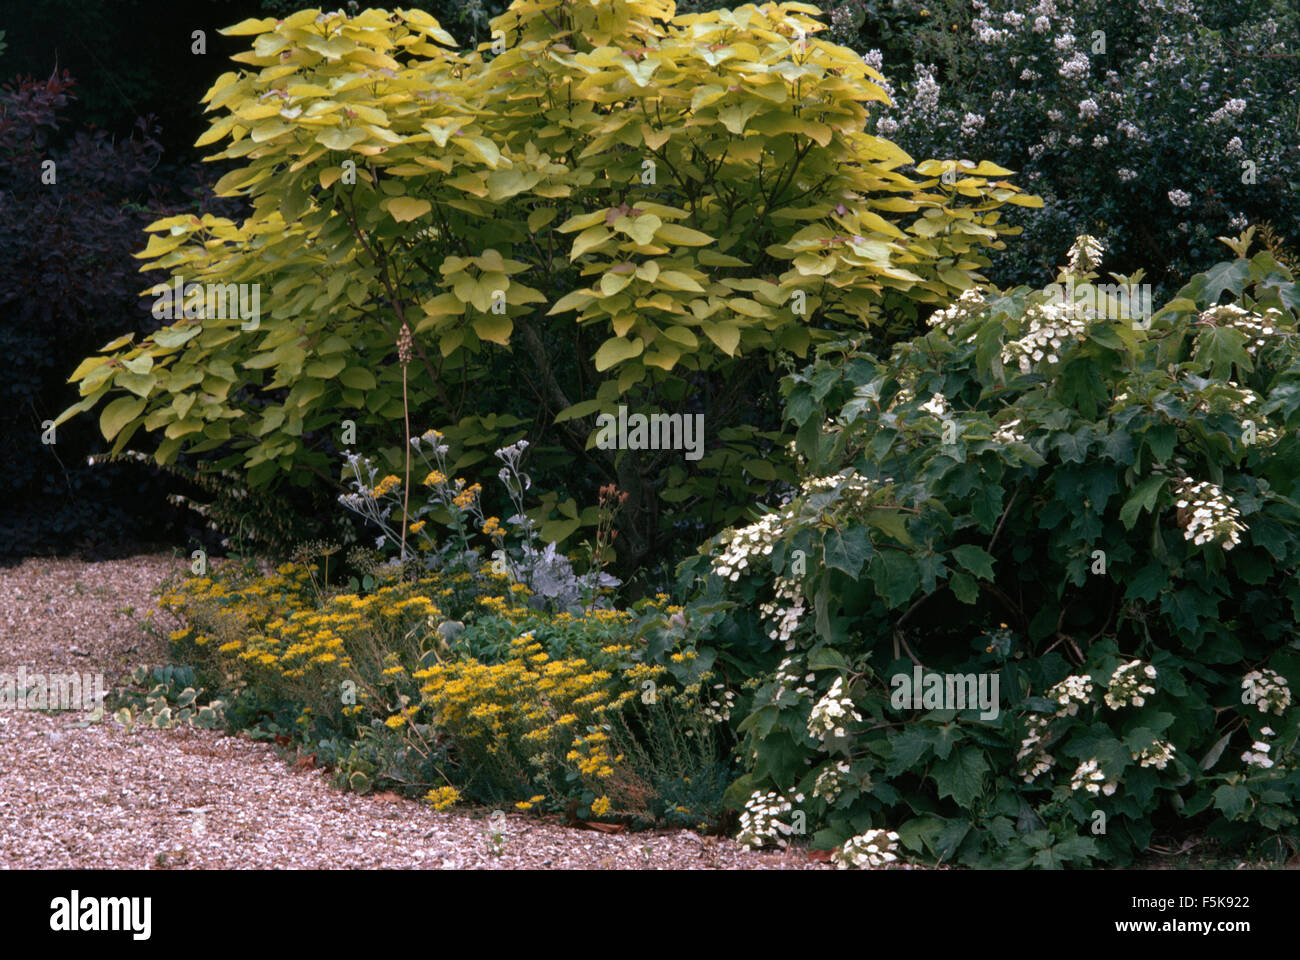 Catalpa tree and a white flowering shrub in a garden border with low growing coreopsis Stock Photo